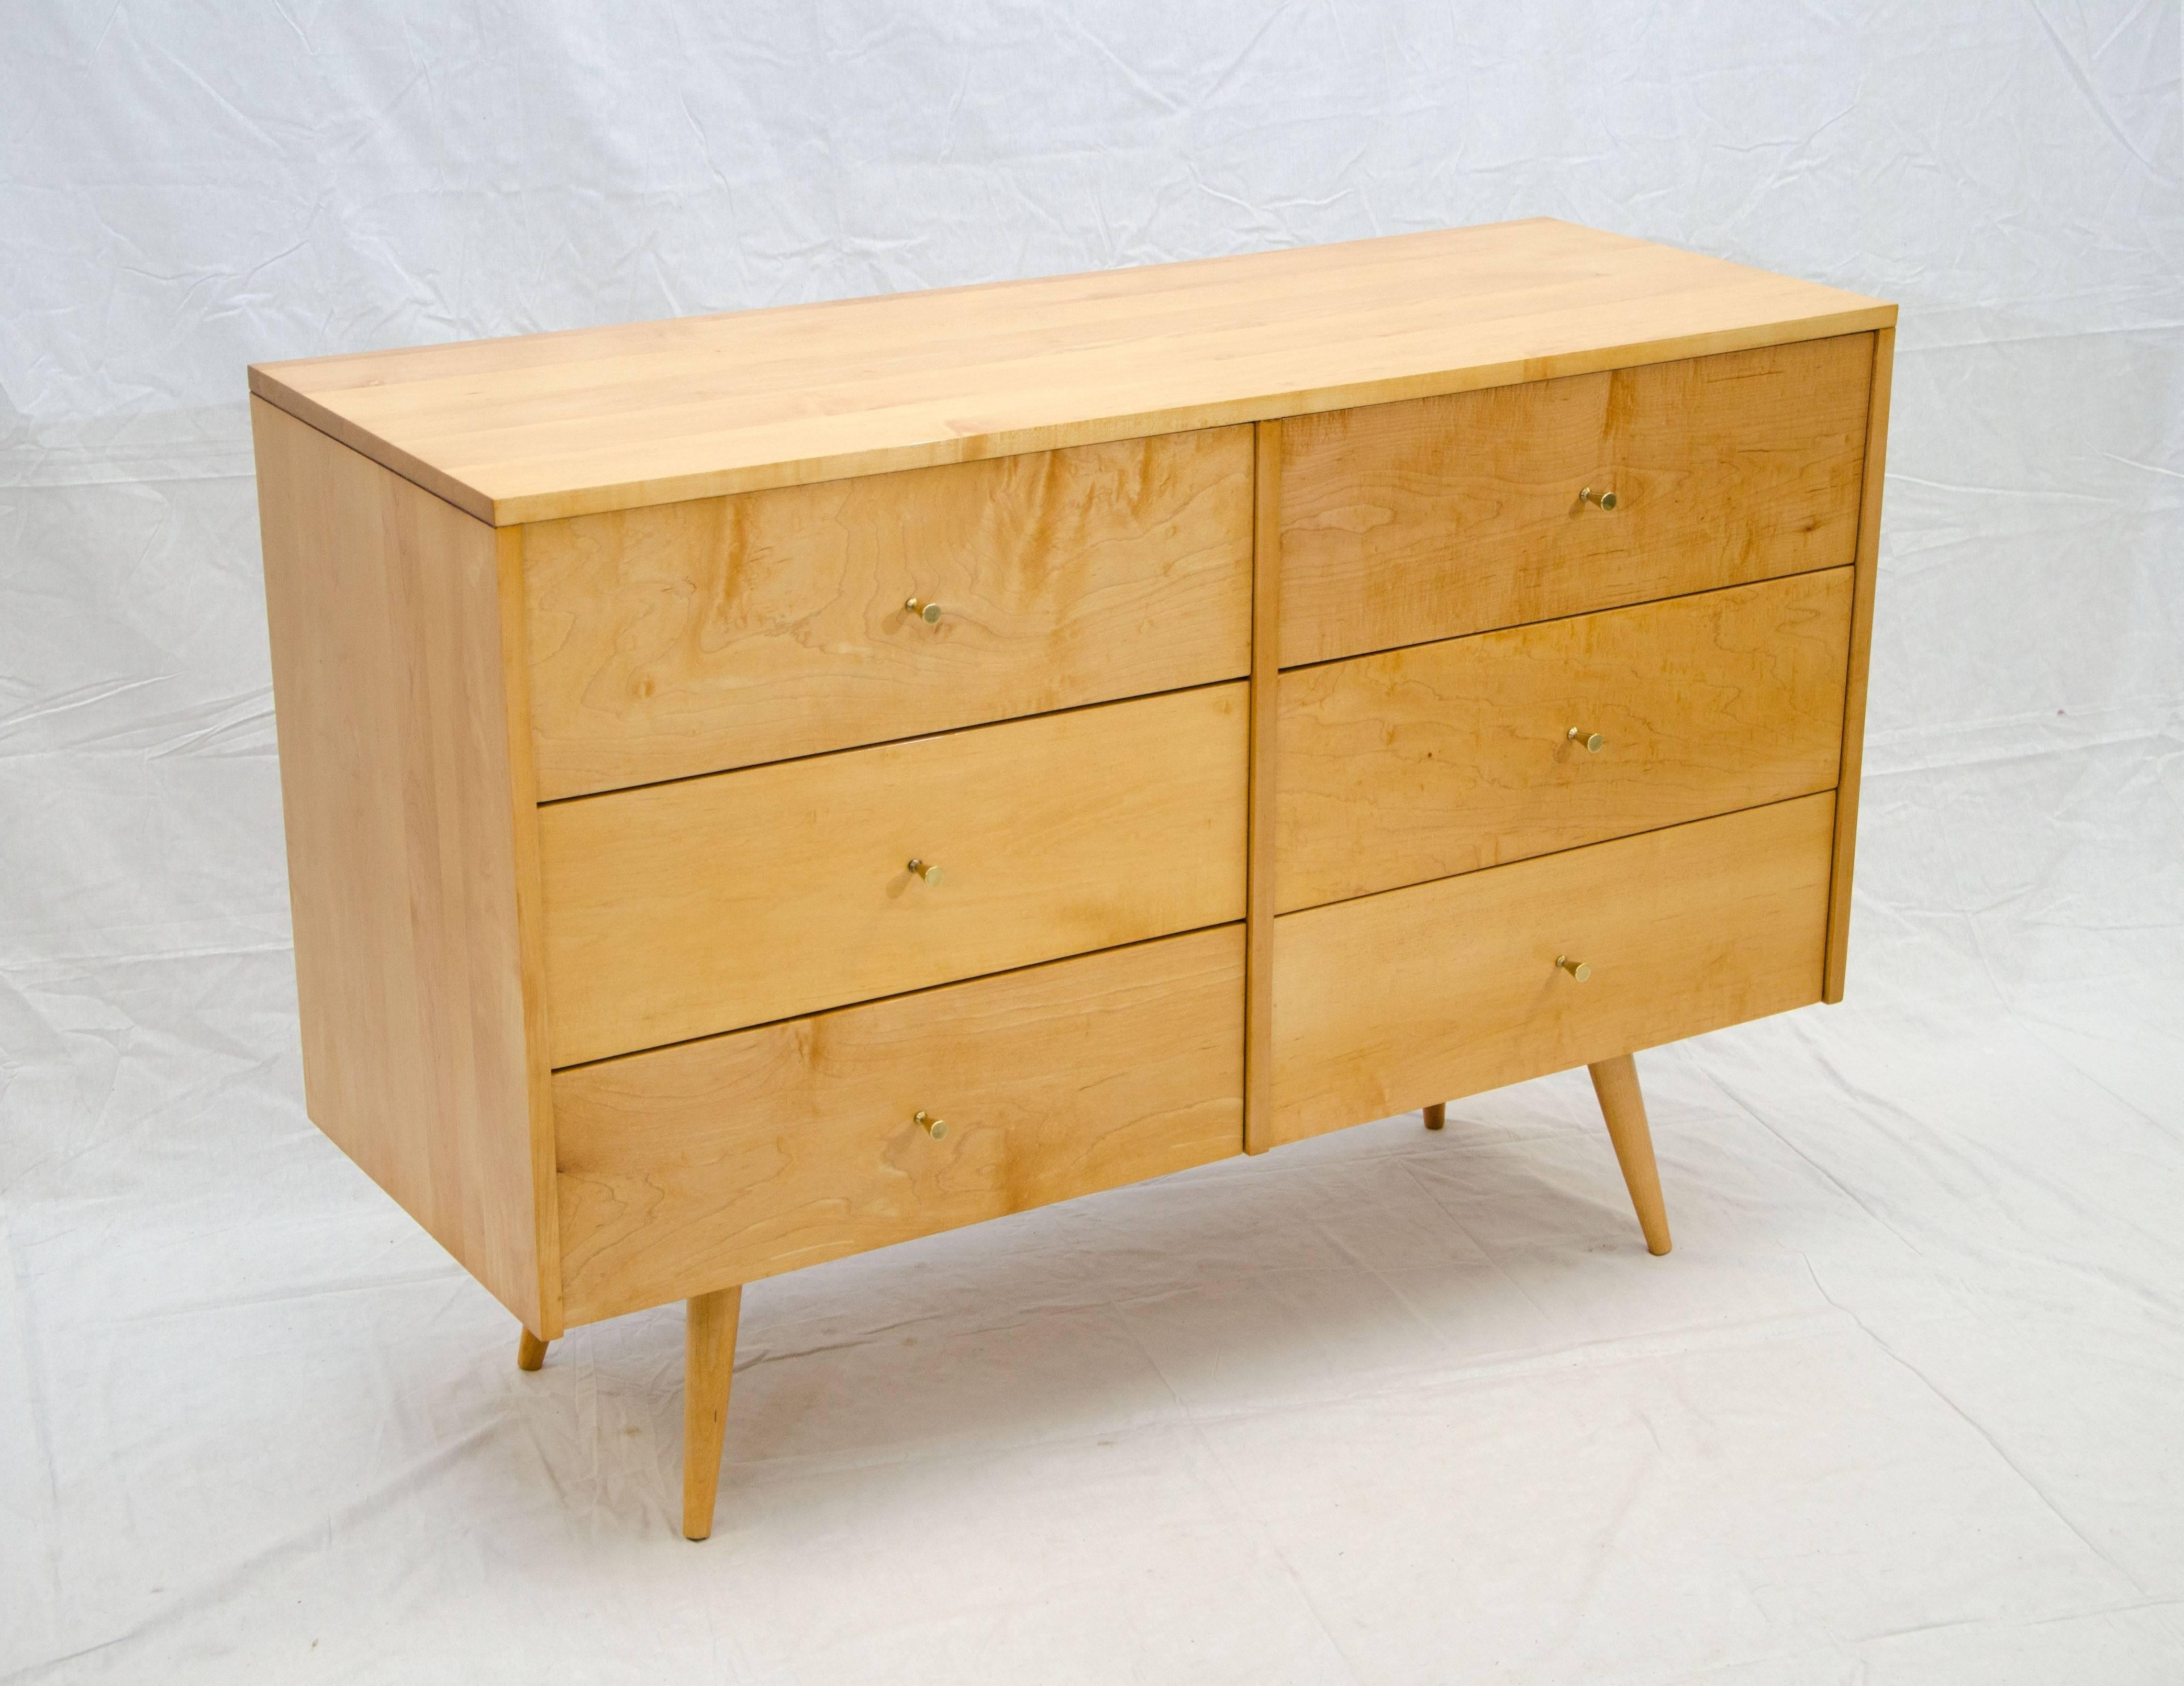 Paul McCobb six-drawer dresser designed for the Planner Group and manufactured by the Winchendon Furniture Co in solid birch on angular tapered legs, which are 9 1/2